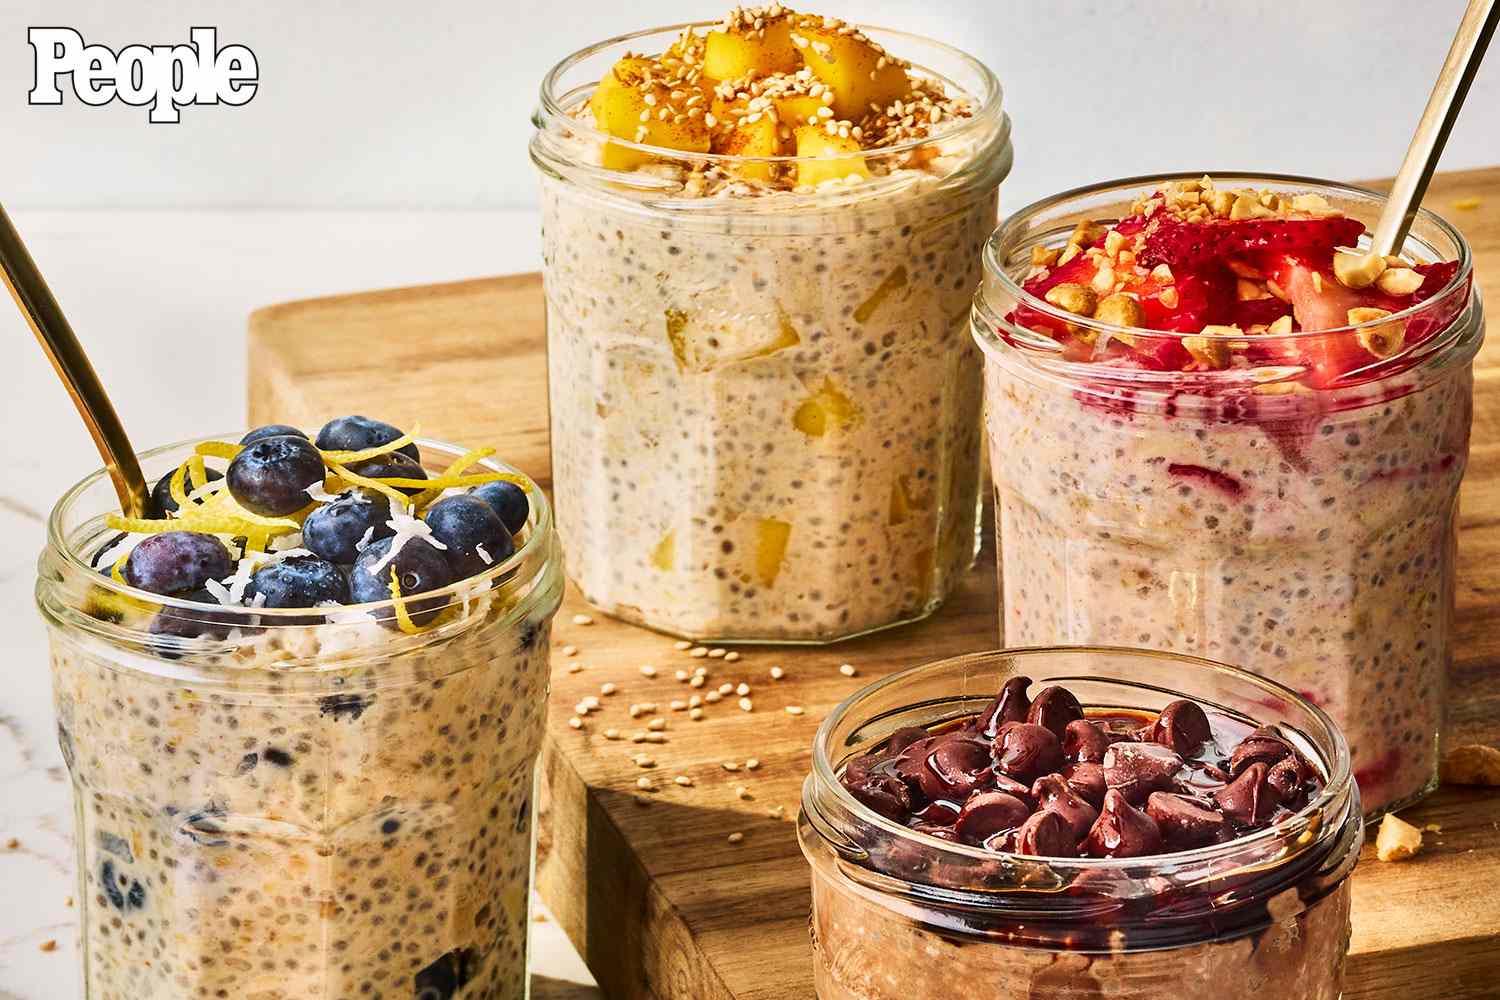 Feel Good Foodie's Yumna Jawad Shares 4 Overnight Oat Recipes for What She Calls 'Morning Dessert'